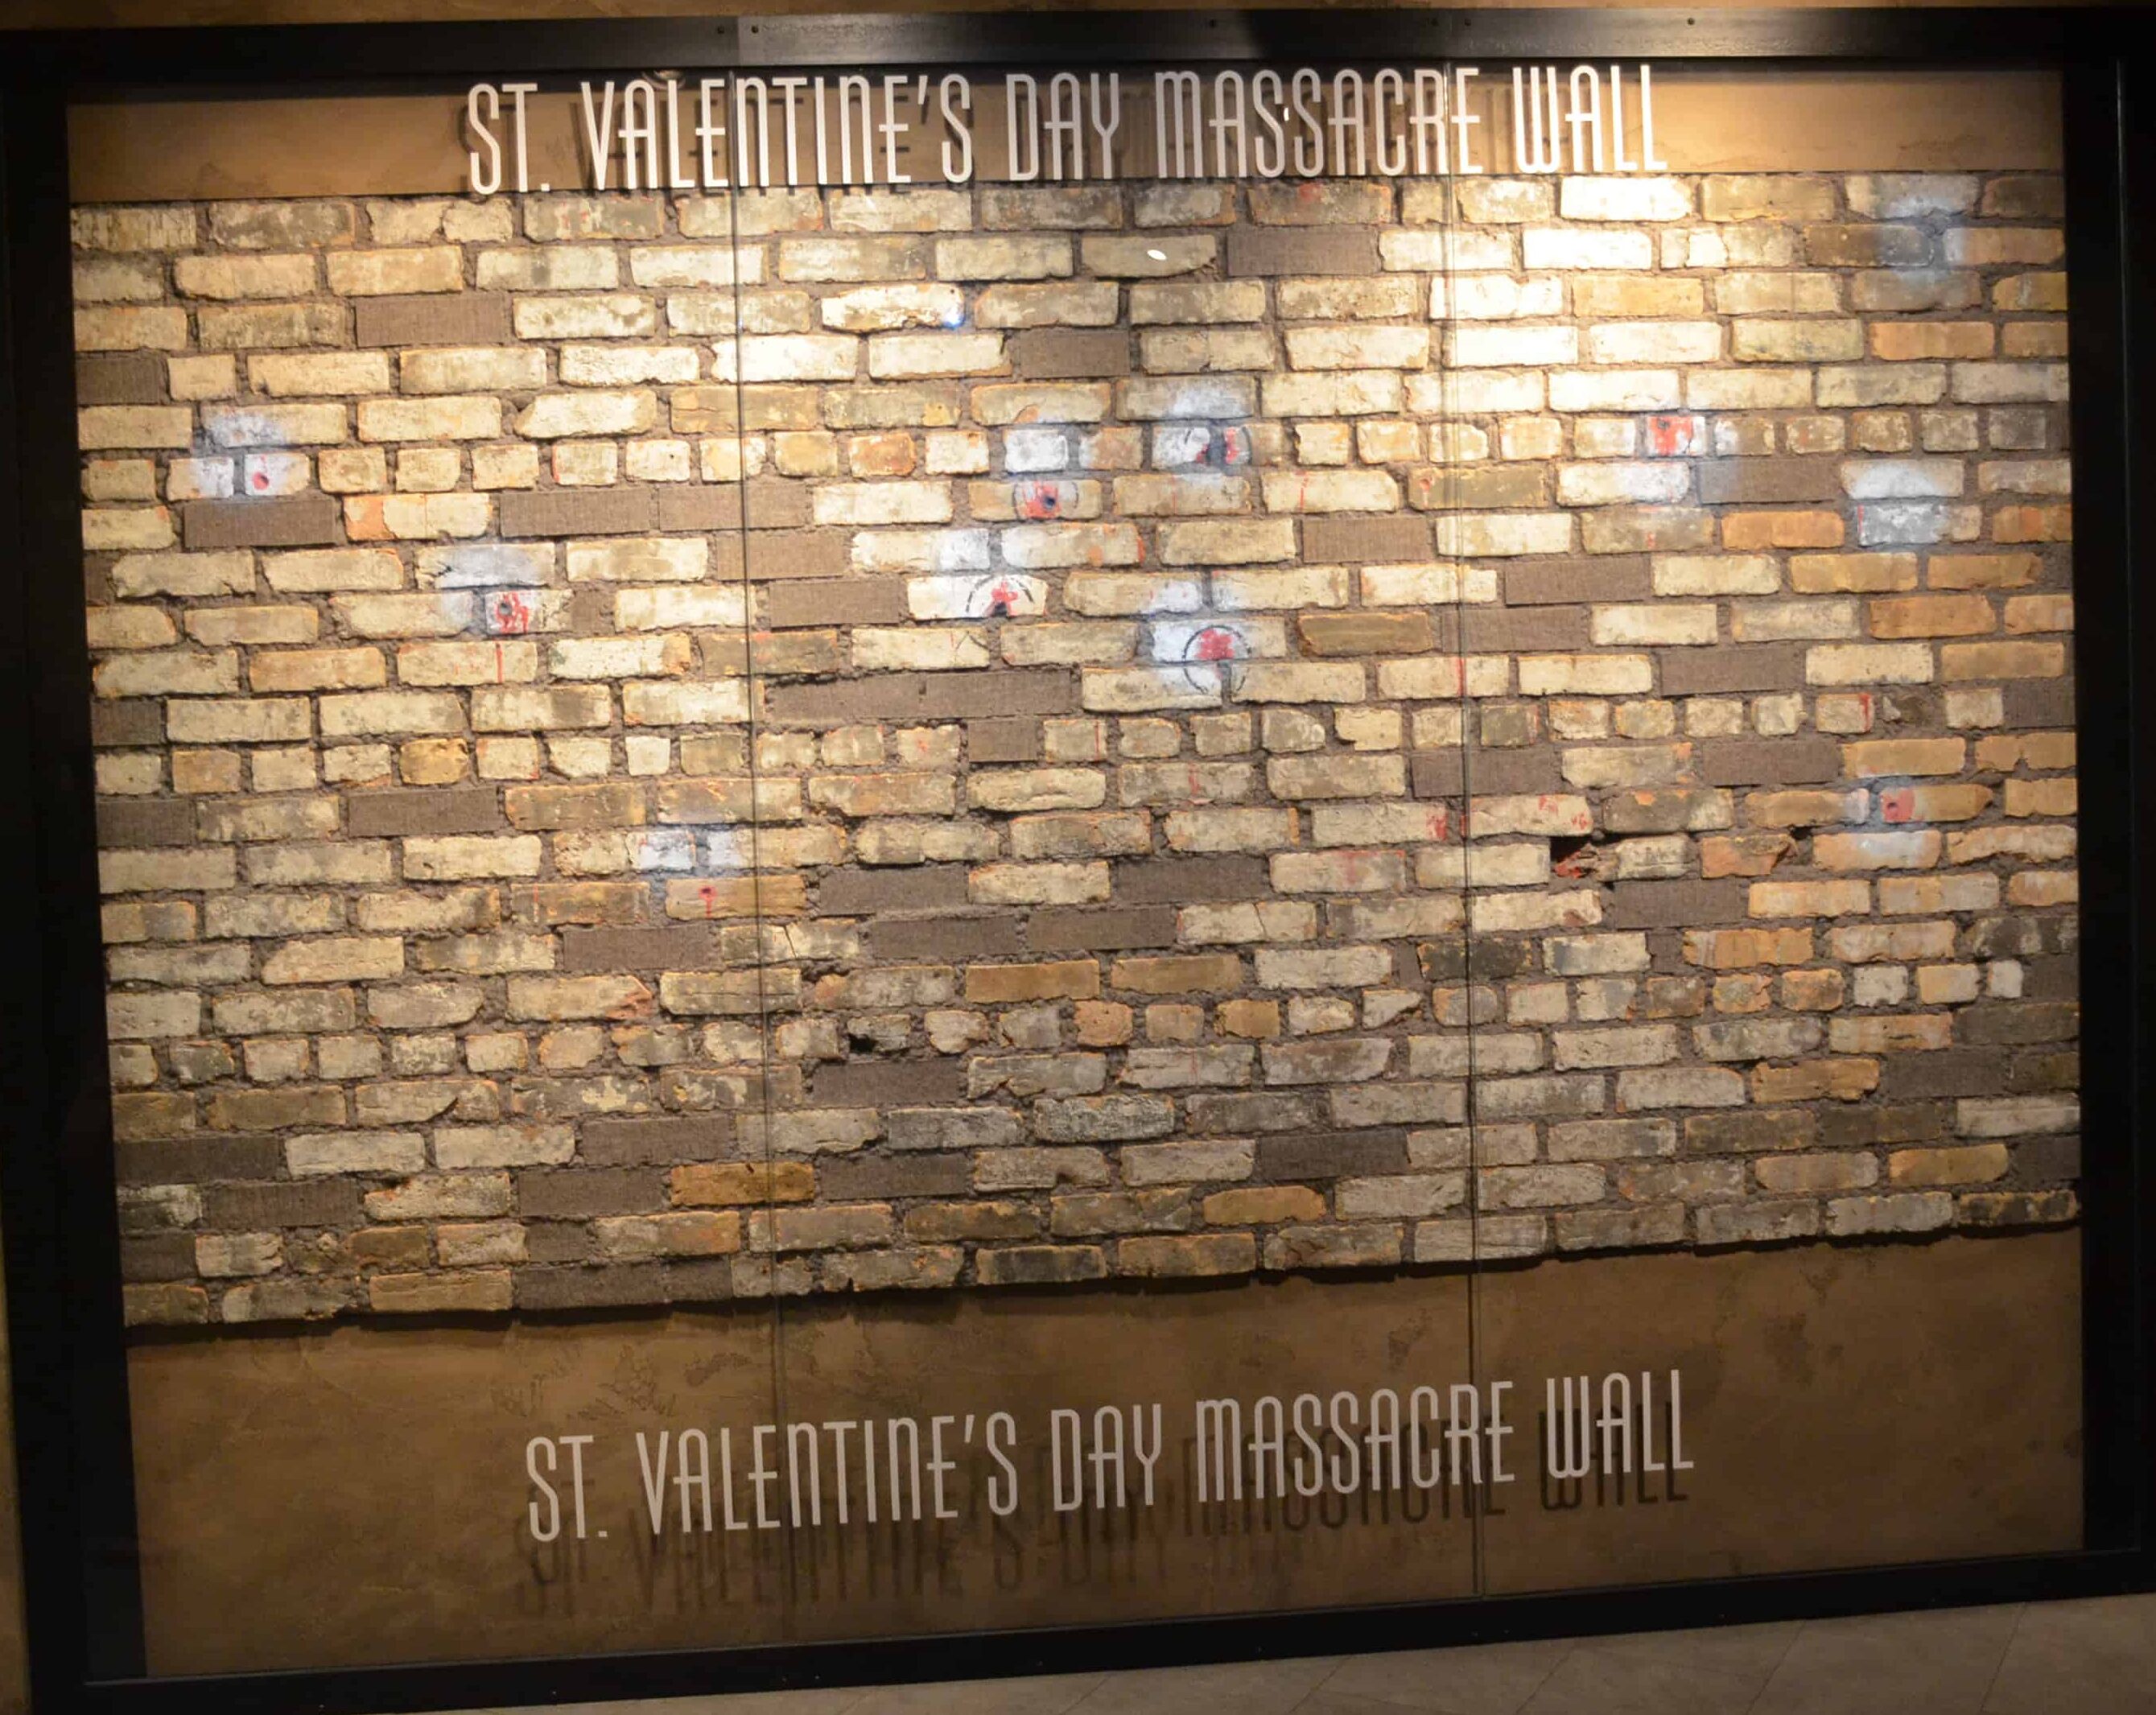 St. Valentine's Day Massacre wall at the Mob Museum in Las Vegas, Nevada